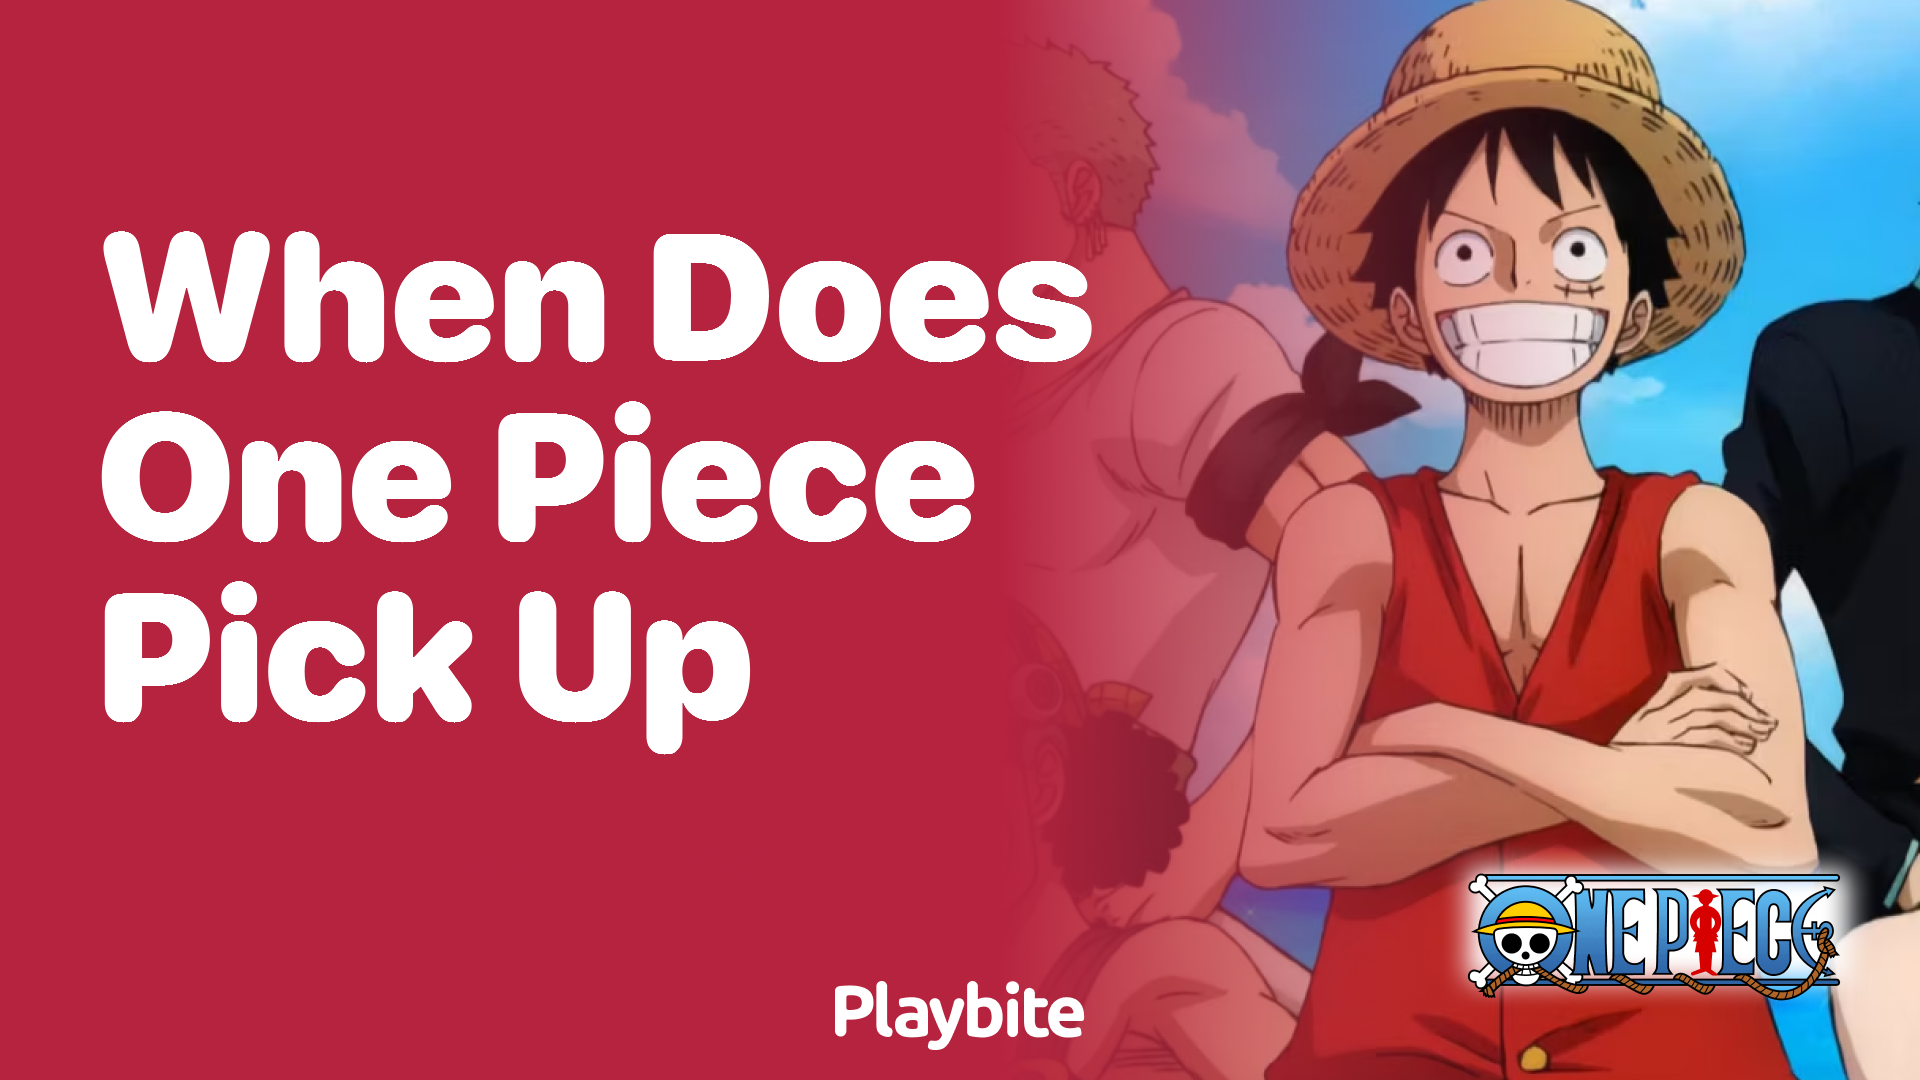 When does One Piece pick up?